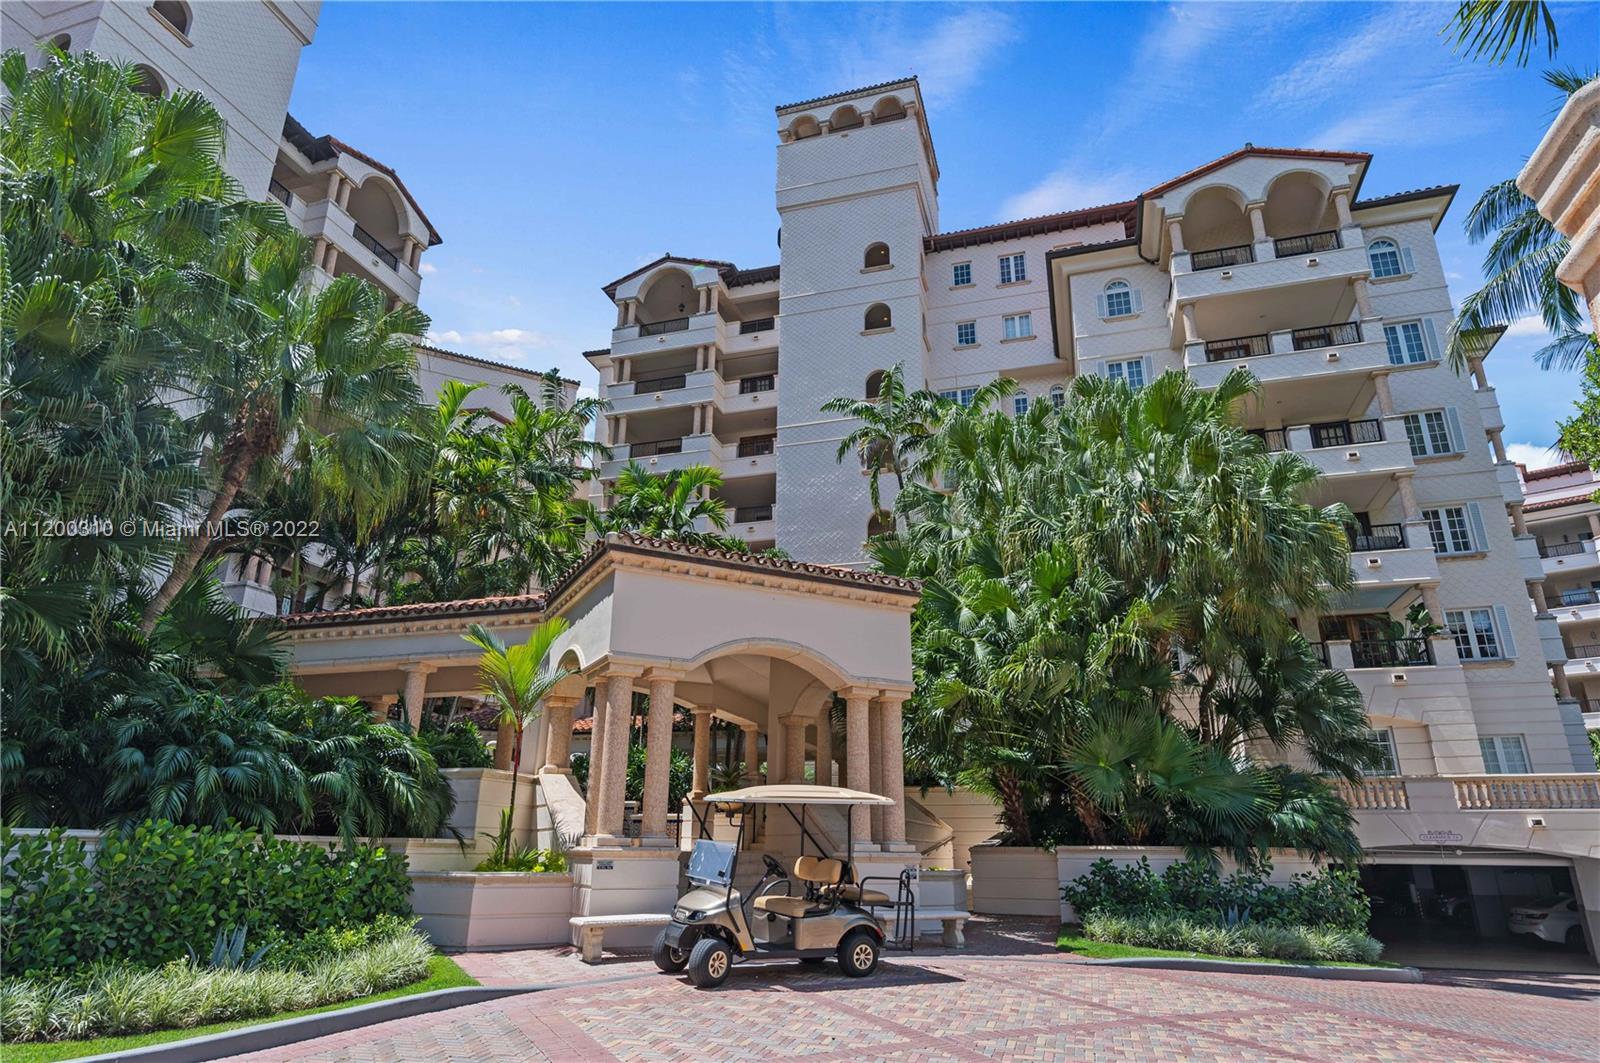 Listing Image 7464 Fisher Island Dr #7464